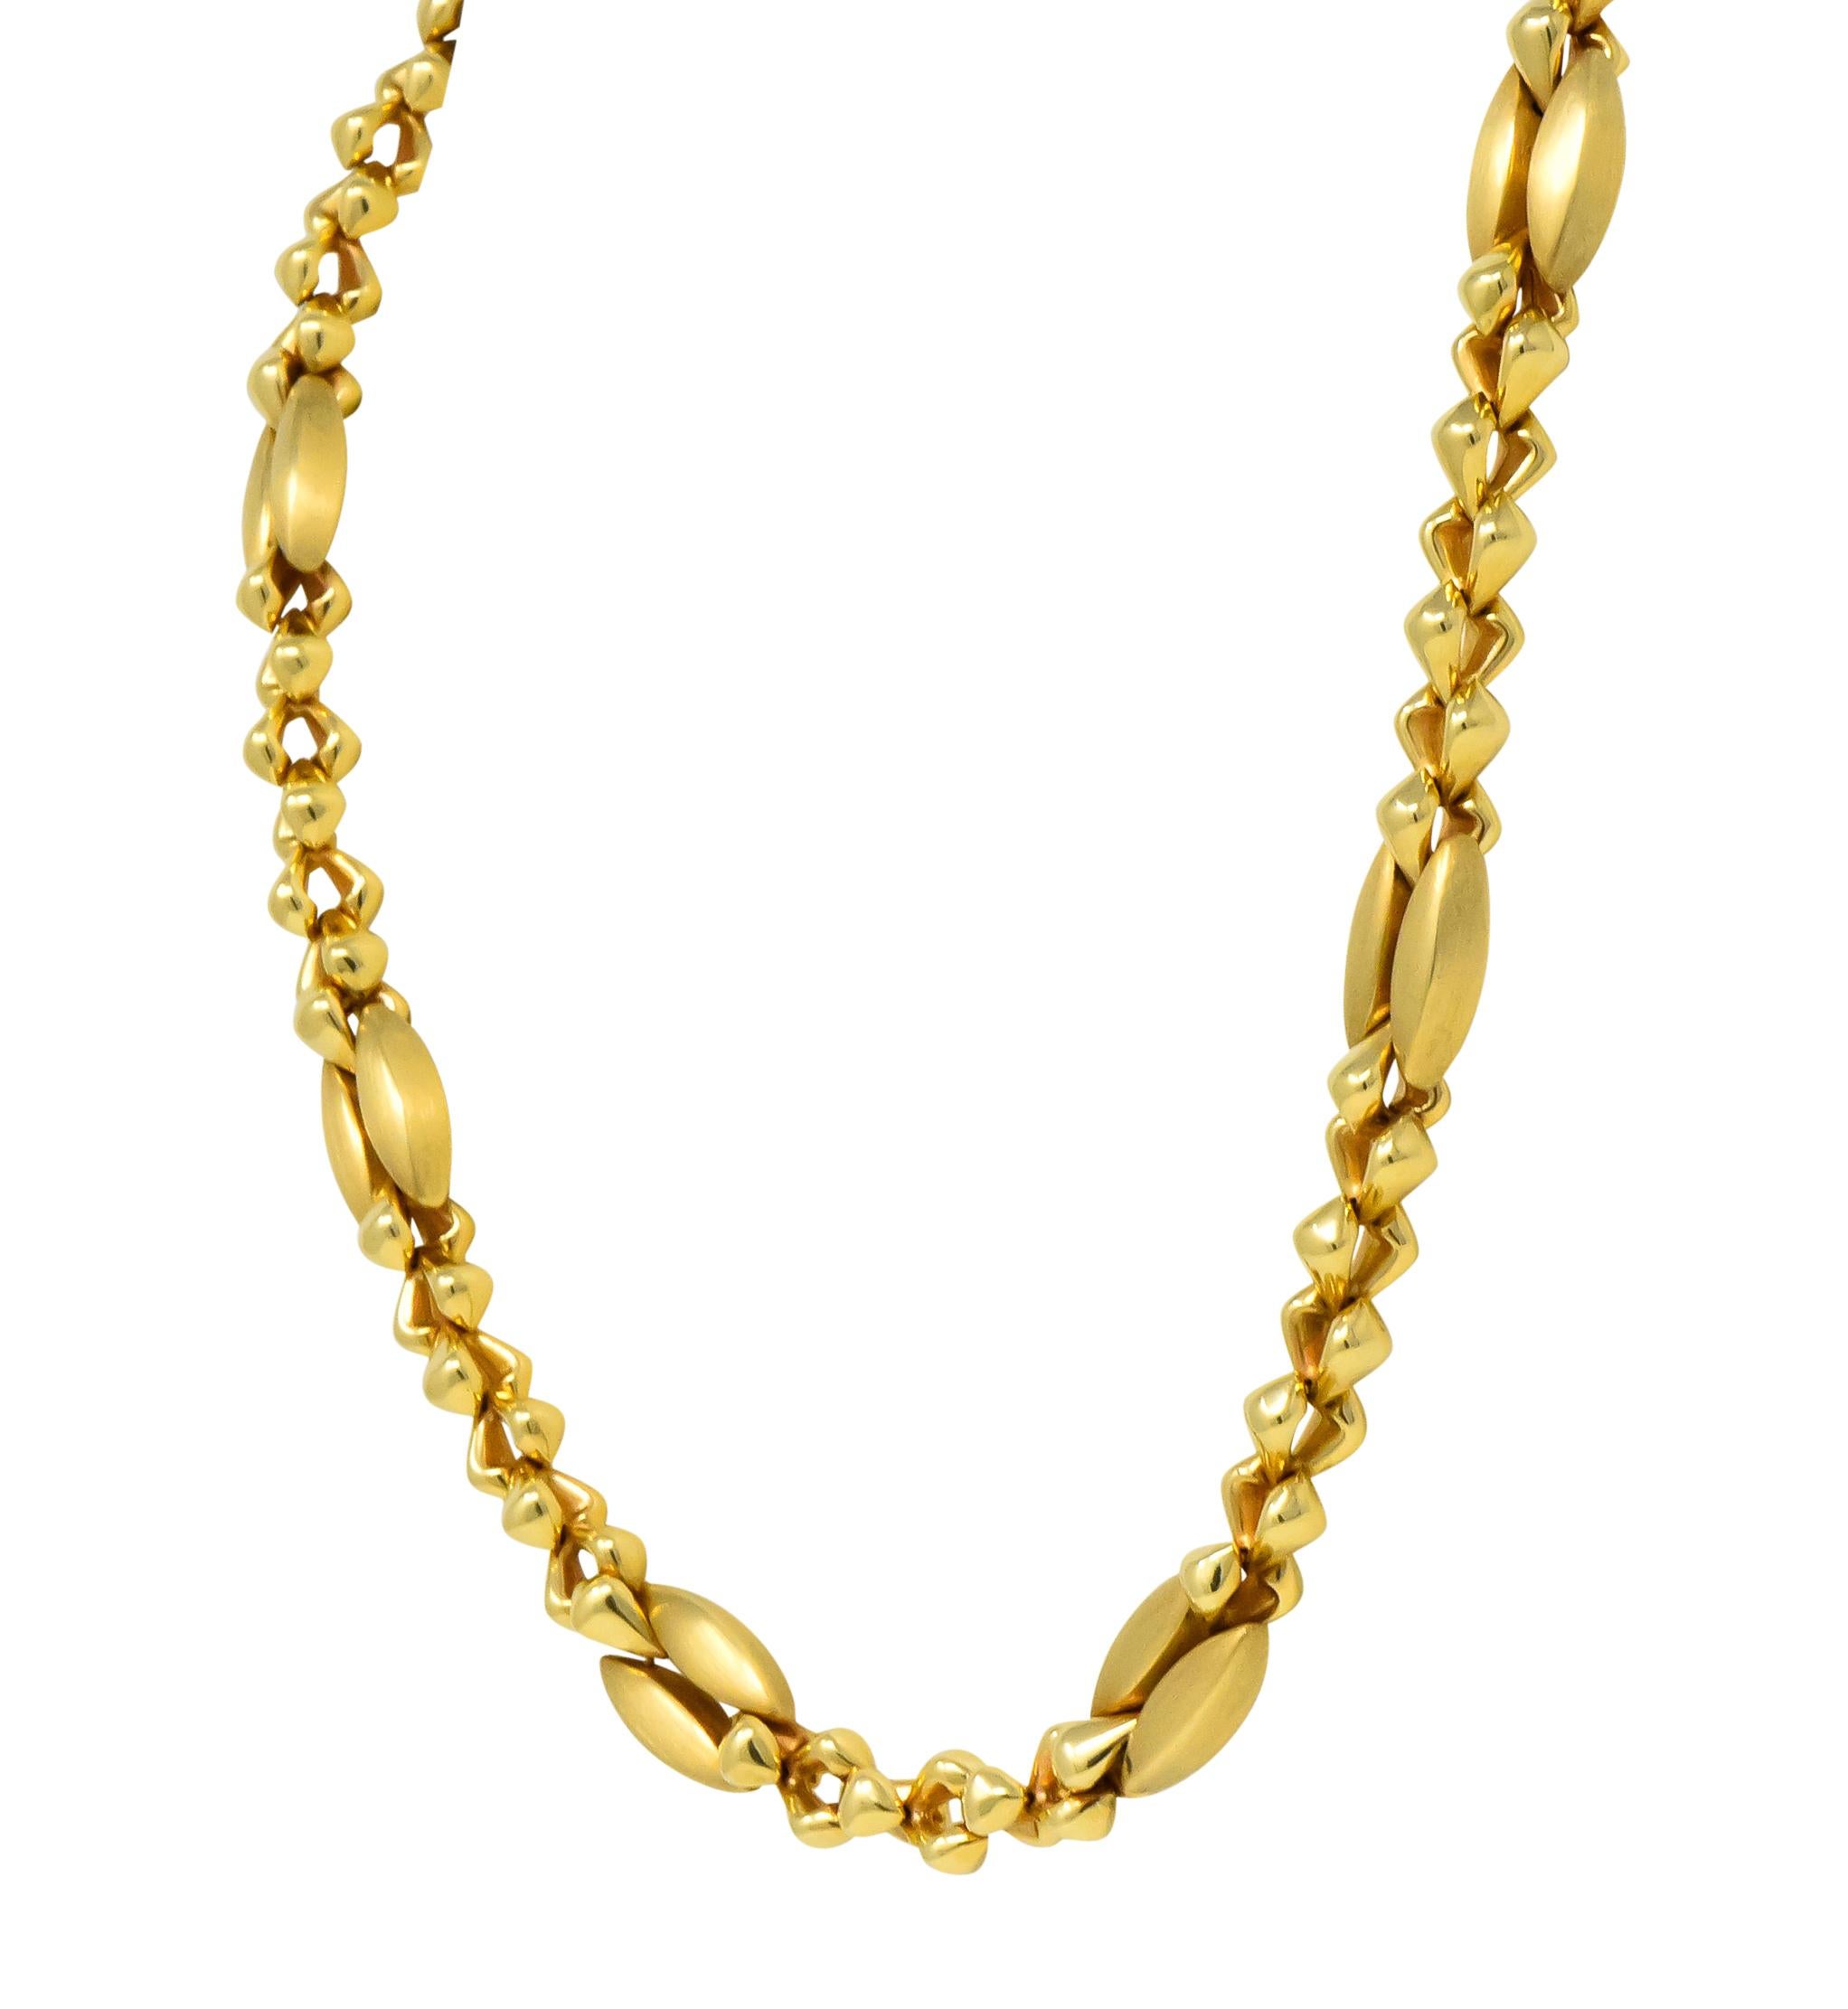 Featuring bold elongated links with matte gold finish and high polish curved triangular links

Ball clasp with push button 

Fully signed Tiffany & Co 585 (for 14 karat) with touchmark

Circa 1980

Measures: 36 inches in length, 7/16 inch at widest